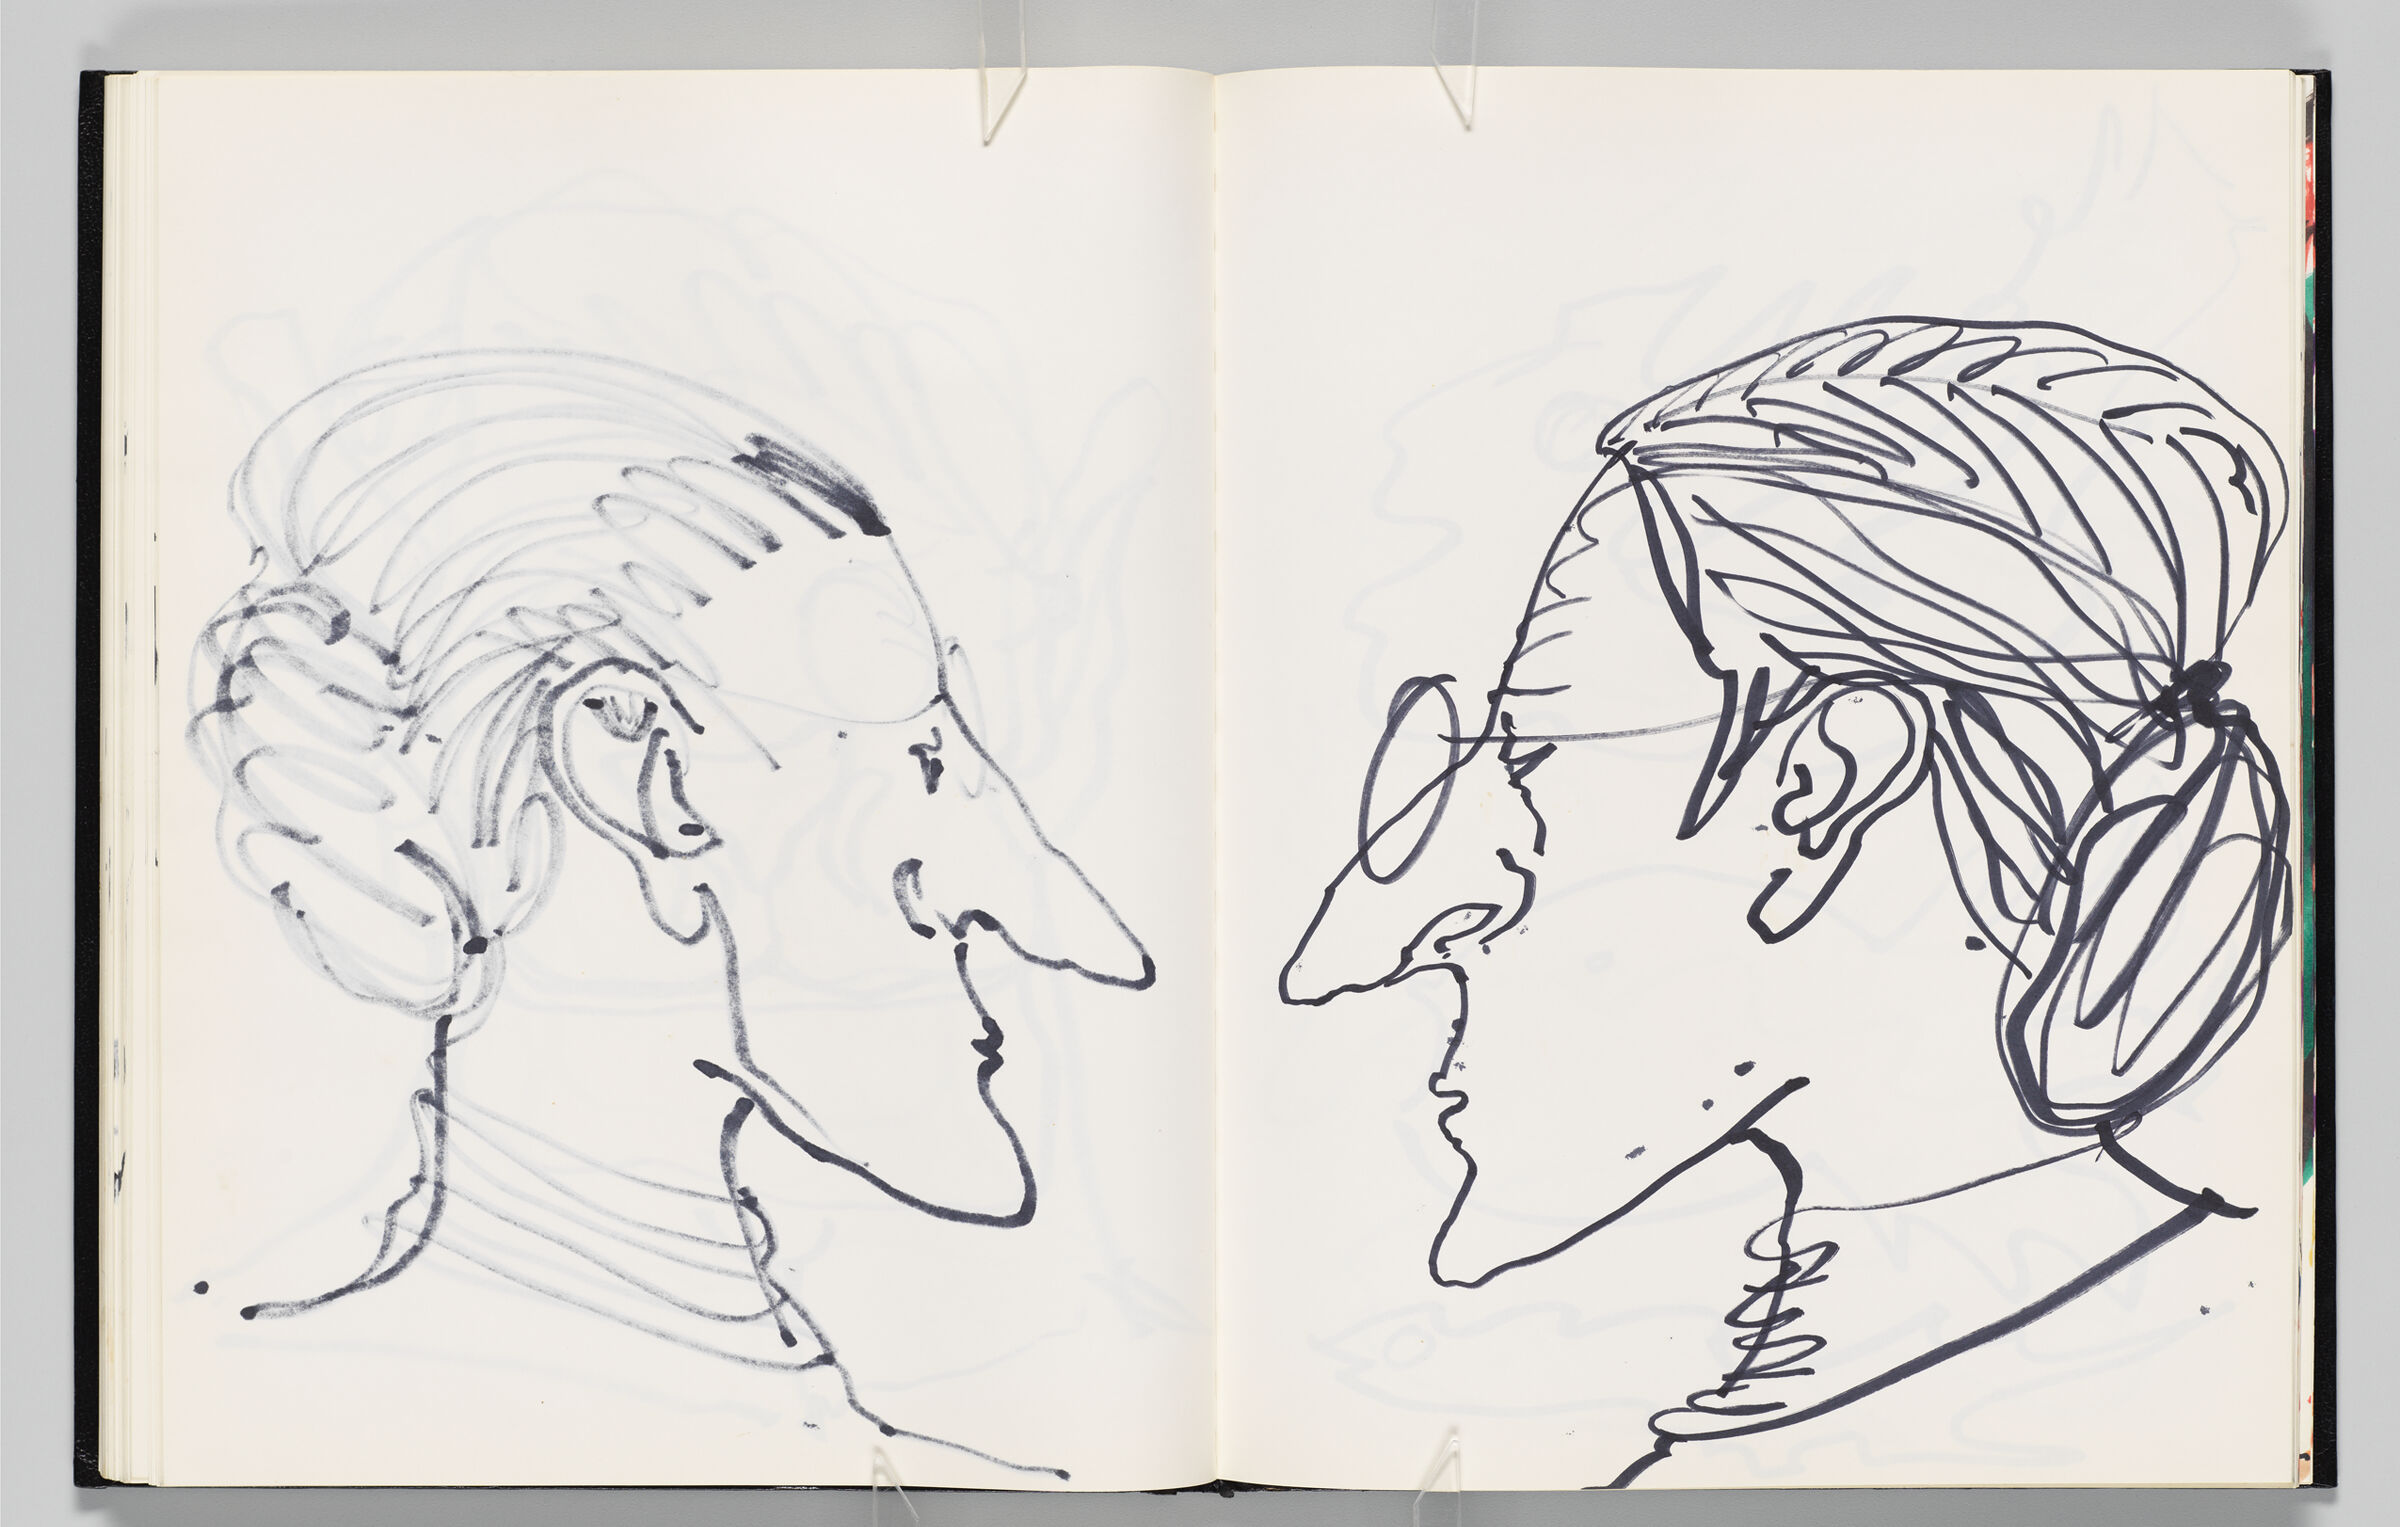 Untitled (Bleed-Through Of Previous Page, Left Page); Untitled (Grandmother In Proflie, Right Page)